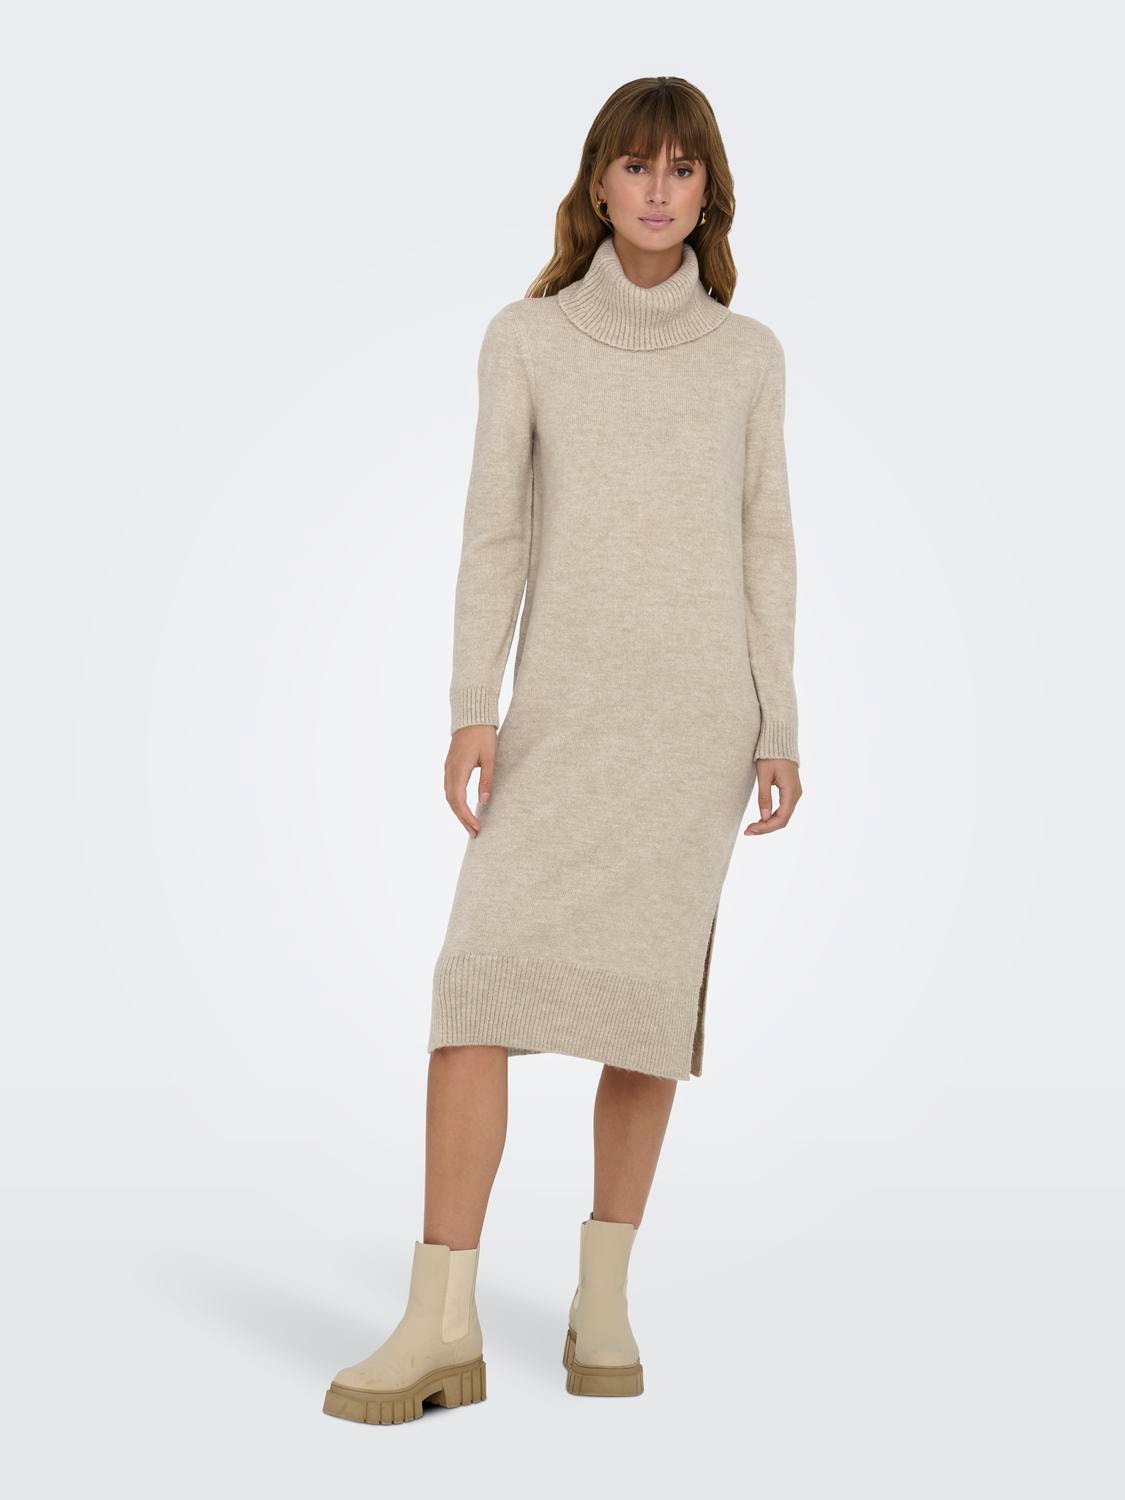 ONLY Col roulé Robe en maille -Pumice Stone - 15214595